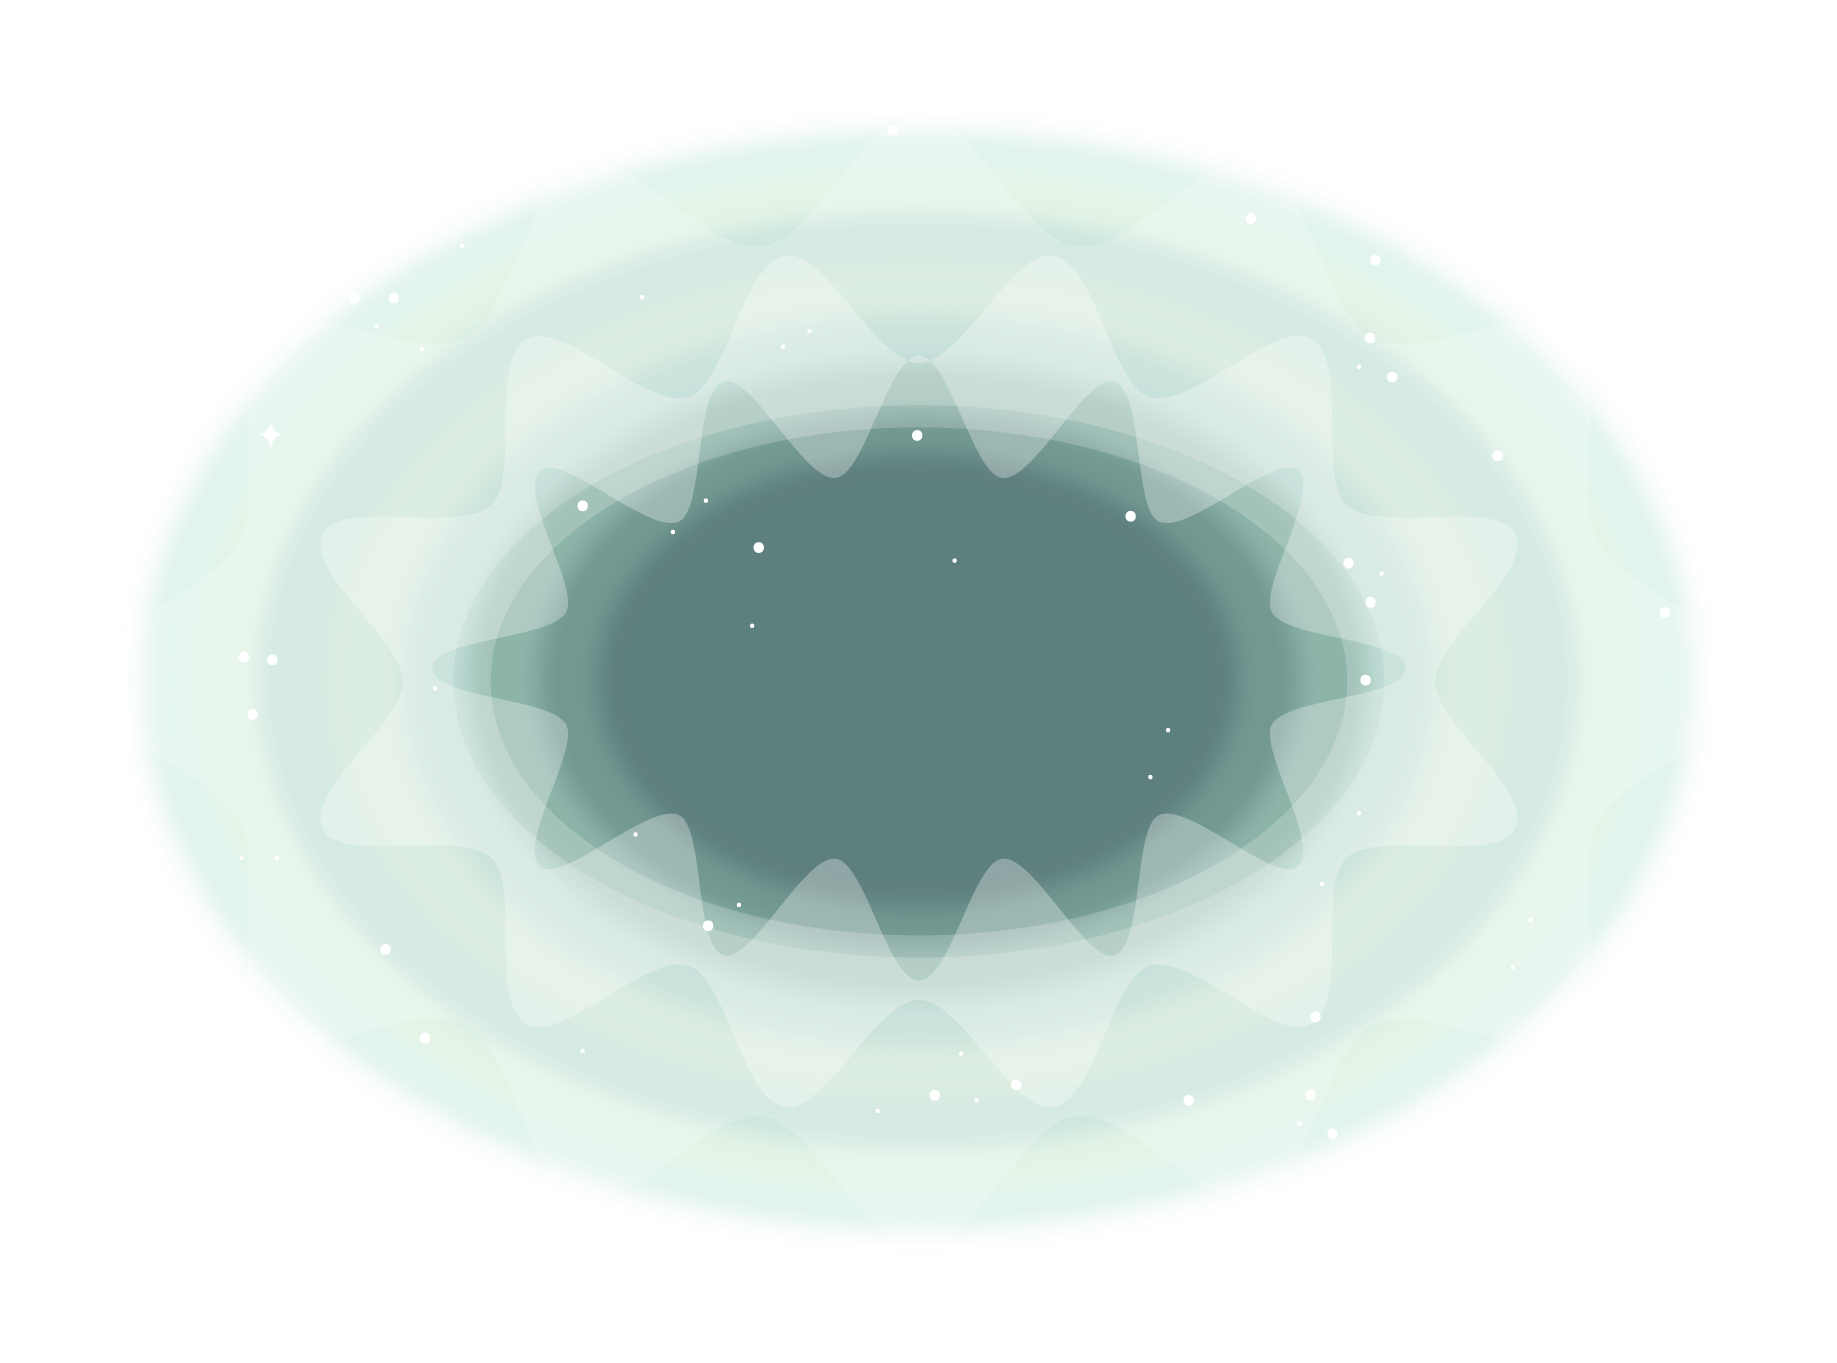 A large horizontal oval shape with stripes of lighter and darker green moves inward to a lighter green oval with waved edges. In the center is a dark green oval that appears like a starburst because of the waved outlines that lay on top. White dots representing stars speckle the image.